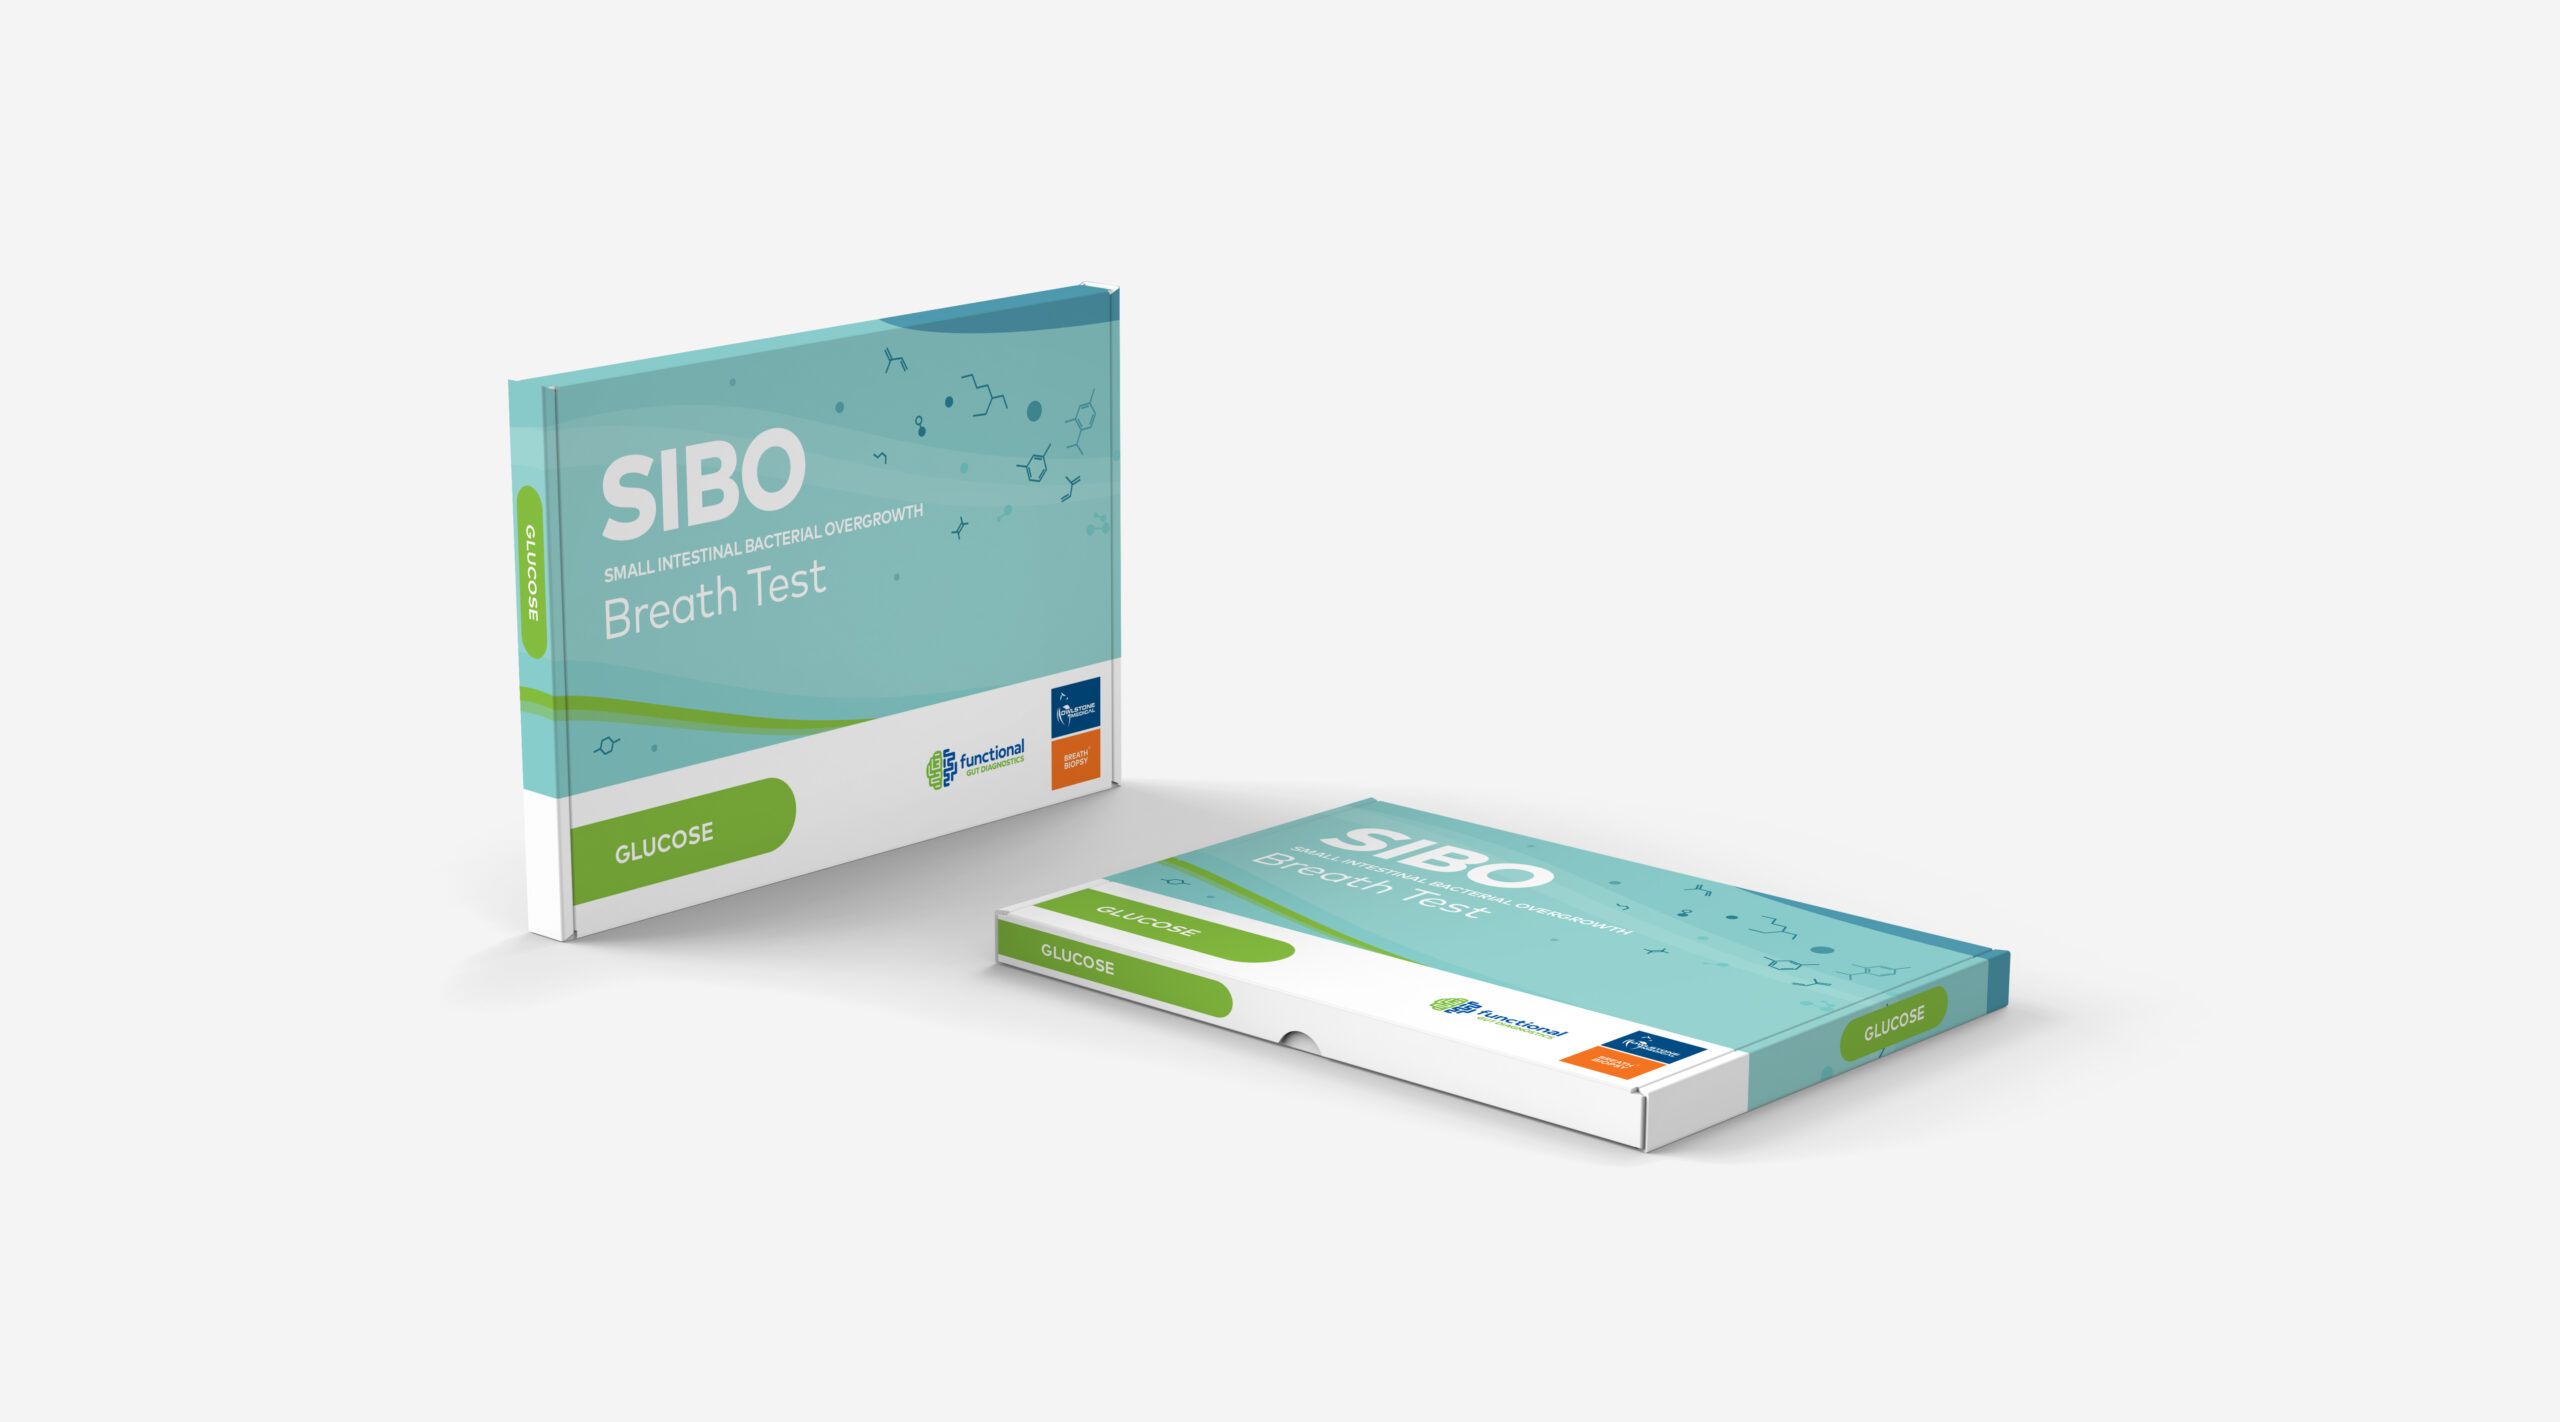 SIBO – Small intestine bacterial overgrowth tests